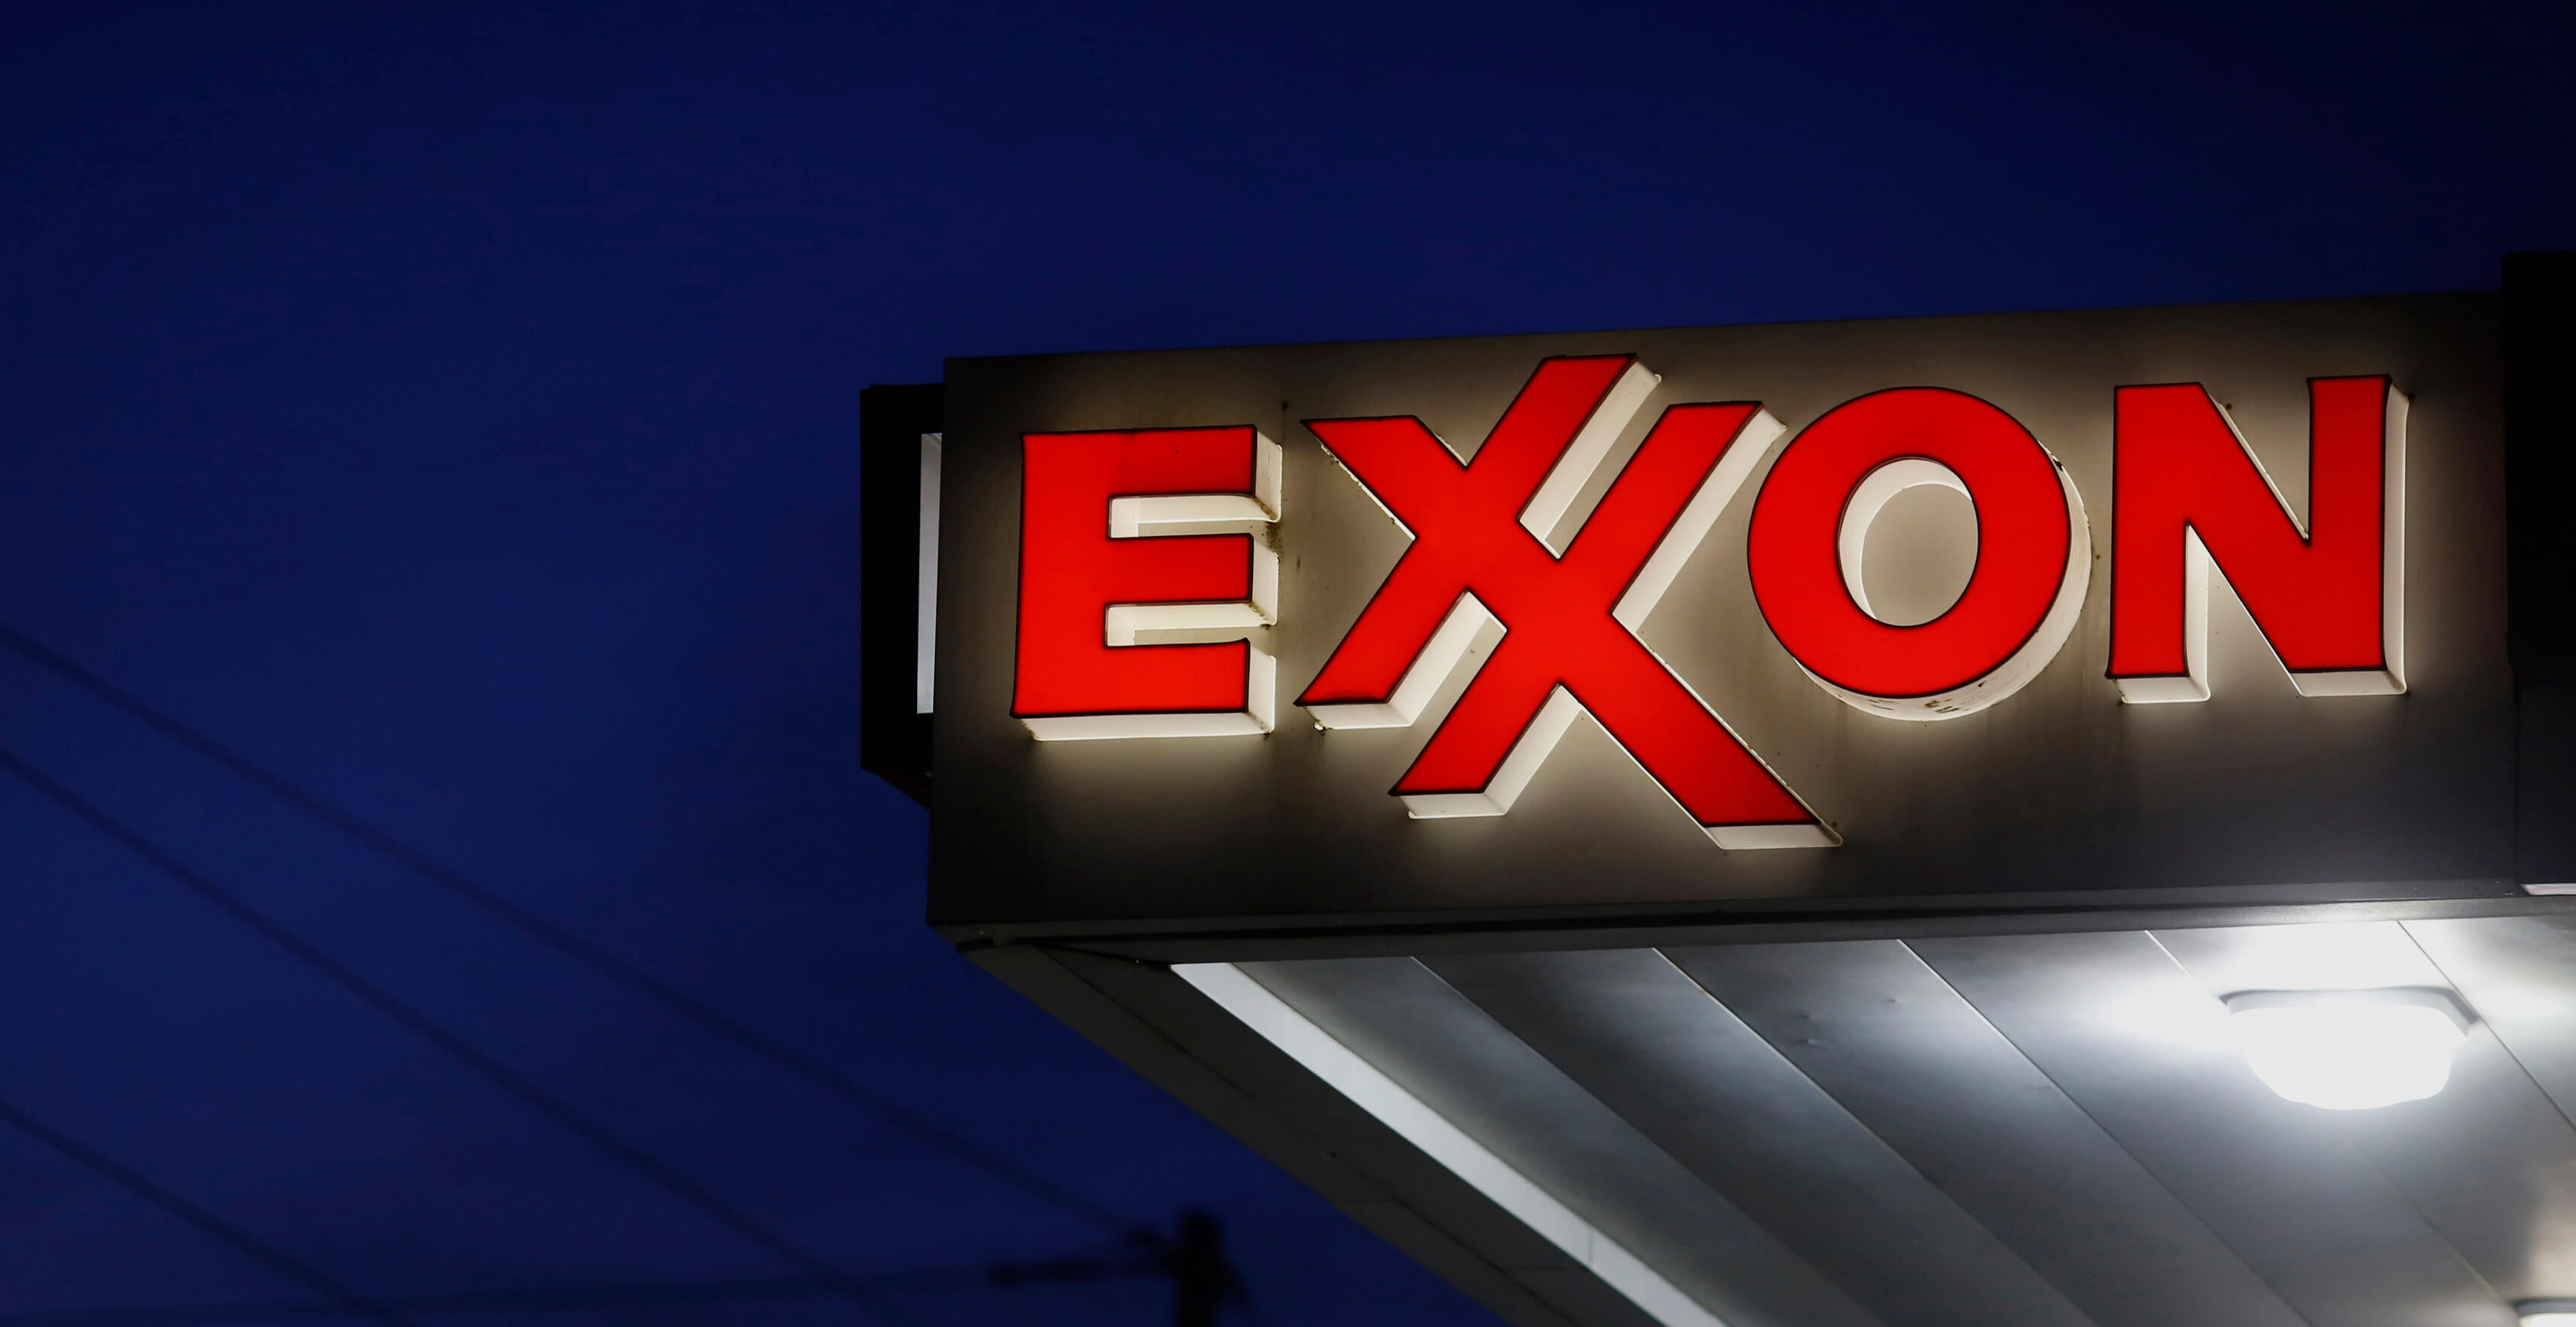 By 2050, Exxon Intends to Reduce Emissions from its Operations to Zero but Won't Quit Fossil Fuels Anytime in the Foreseeable Future